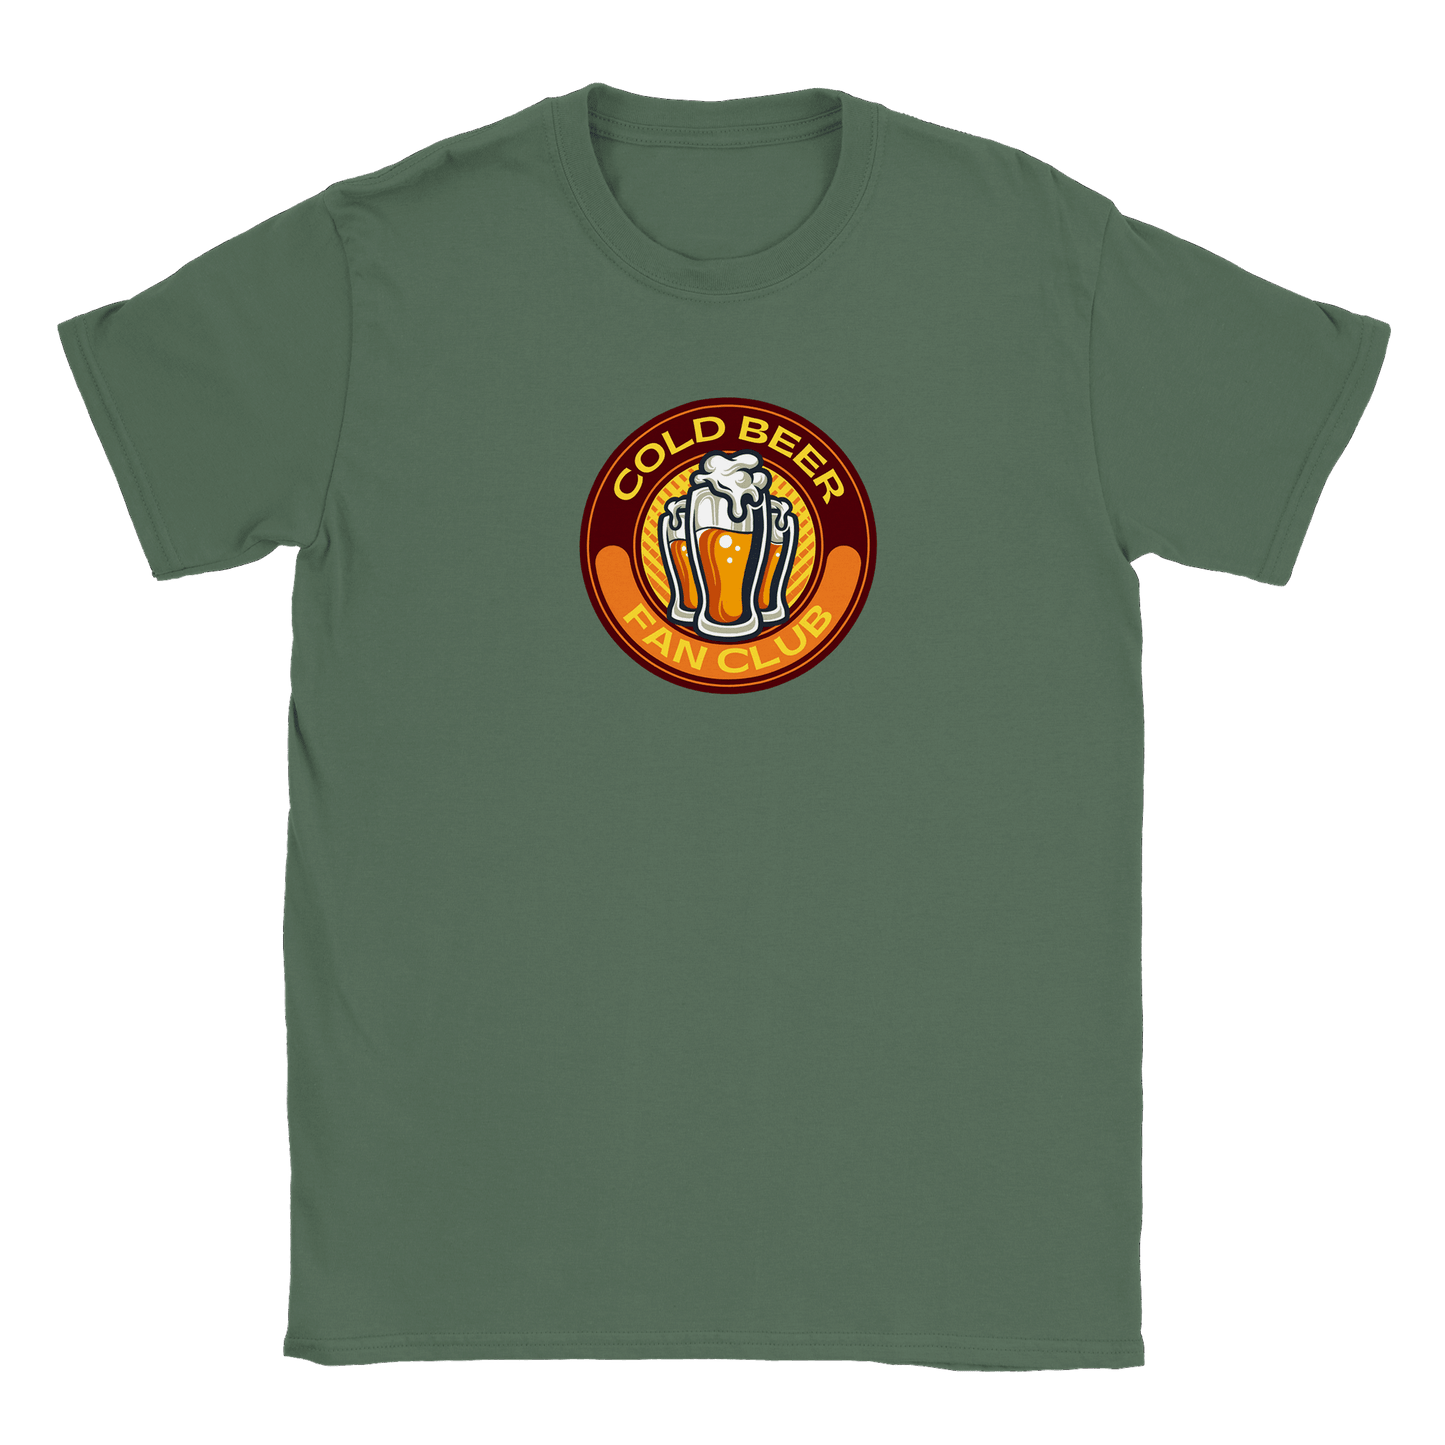 Cold Beer Fan Club - T-shirt Military Green